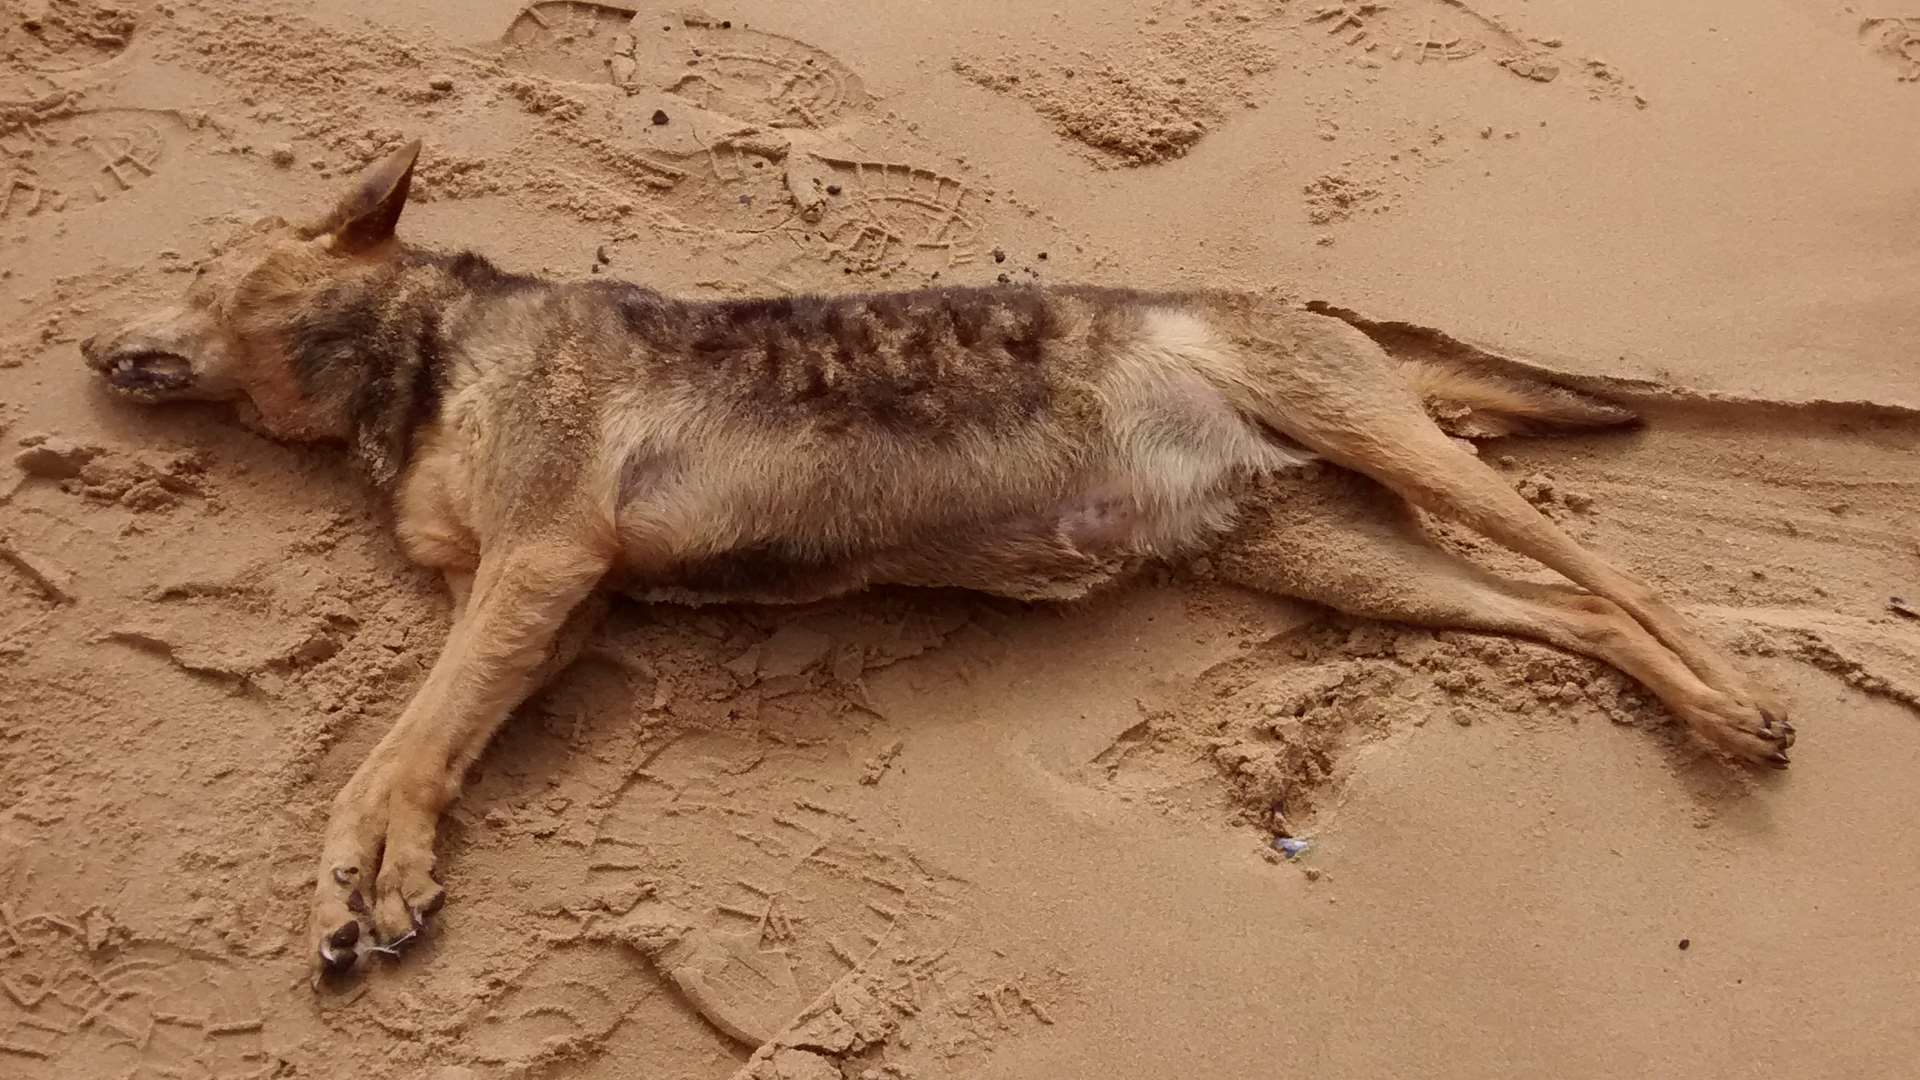 The dog was found wrapped in a plastic sheet on Ramsgate Main Sands.